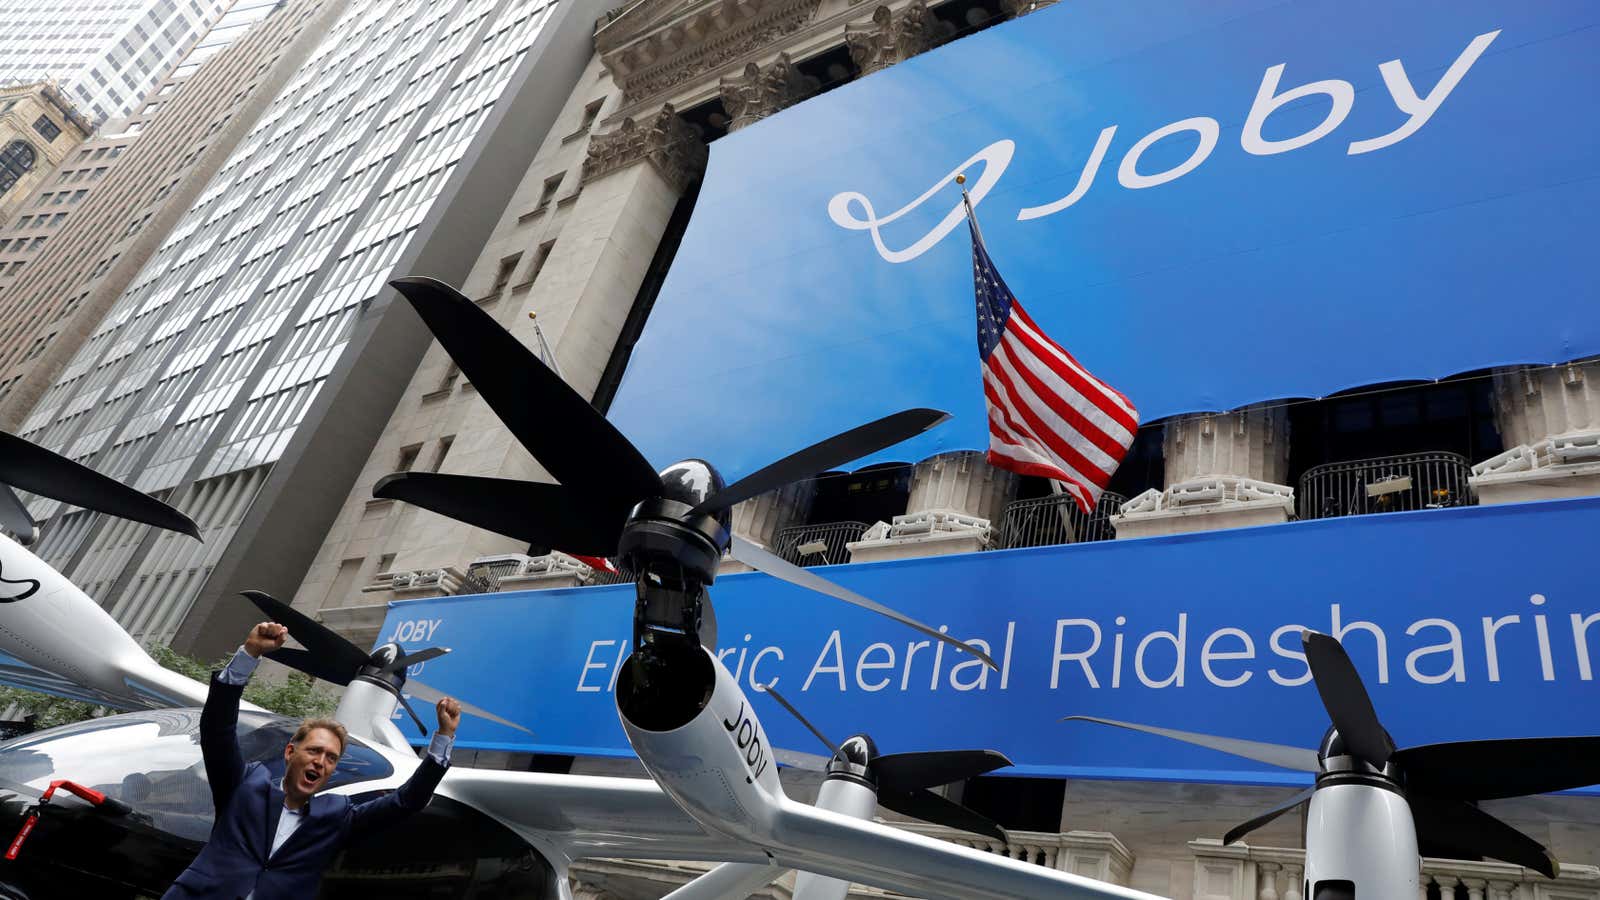 Joby Aviation listed on the New York Stock Exchange on Aug. 11.